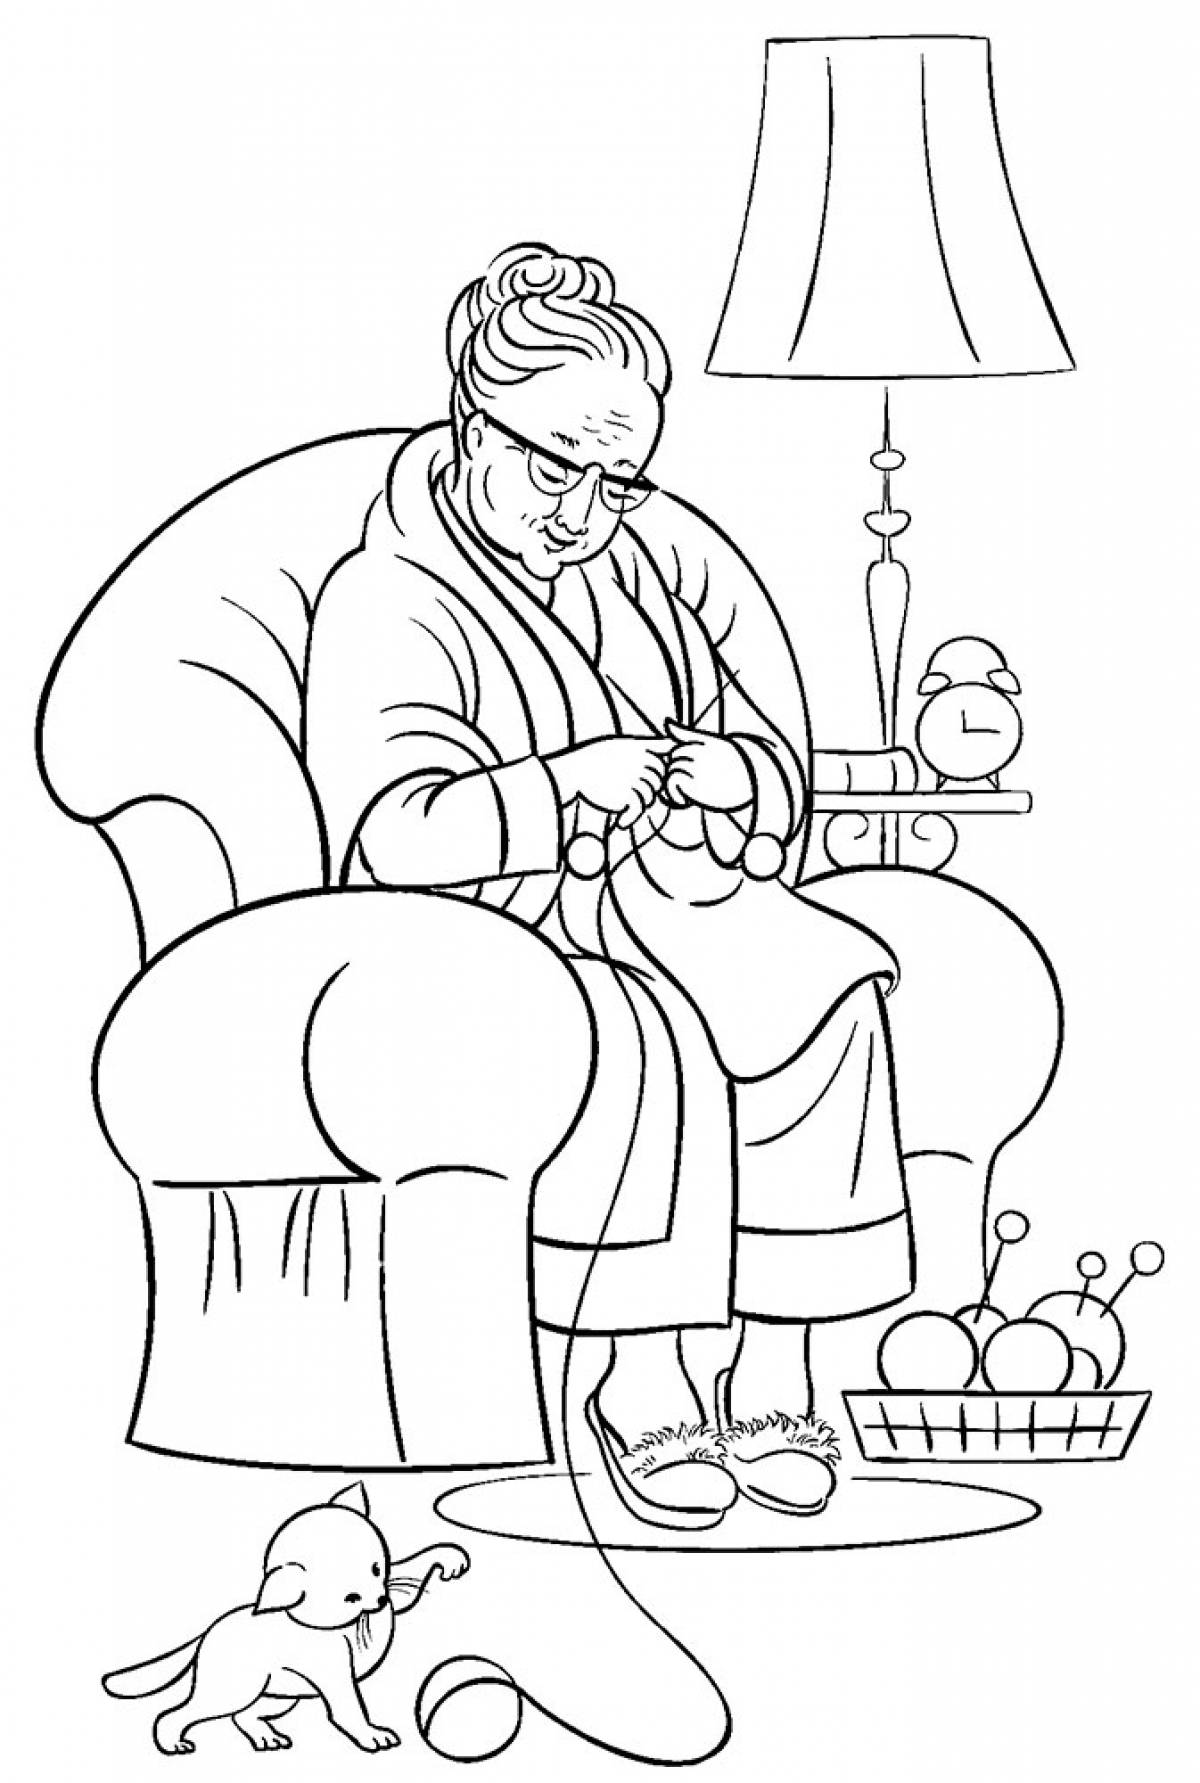 Grandmother knits in a chair